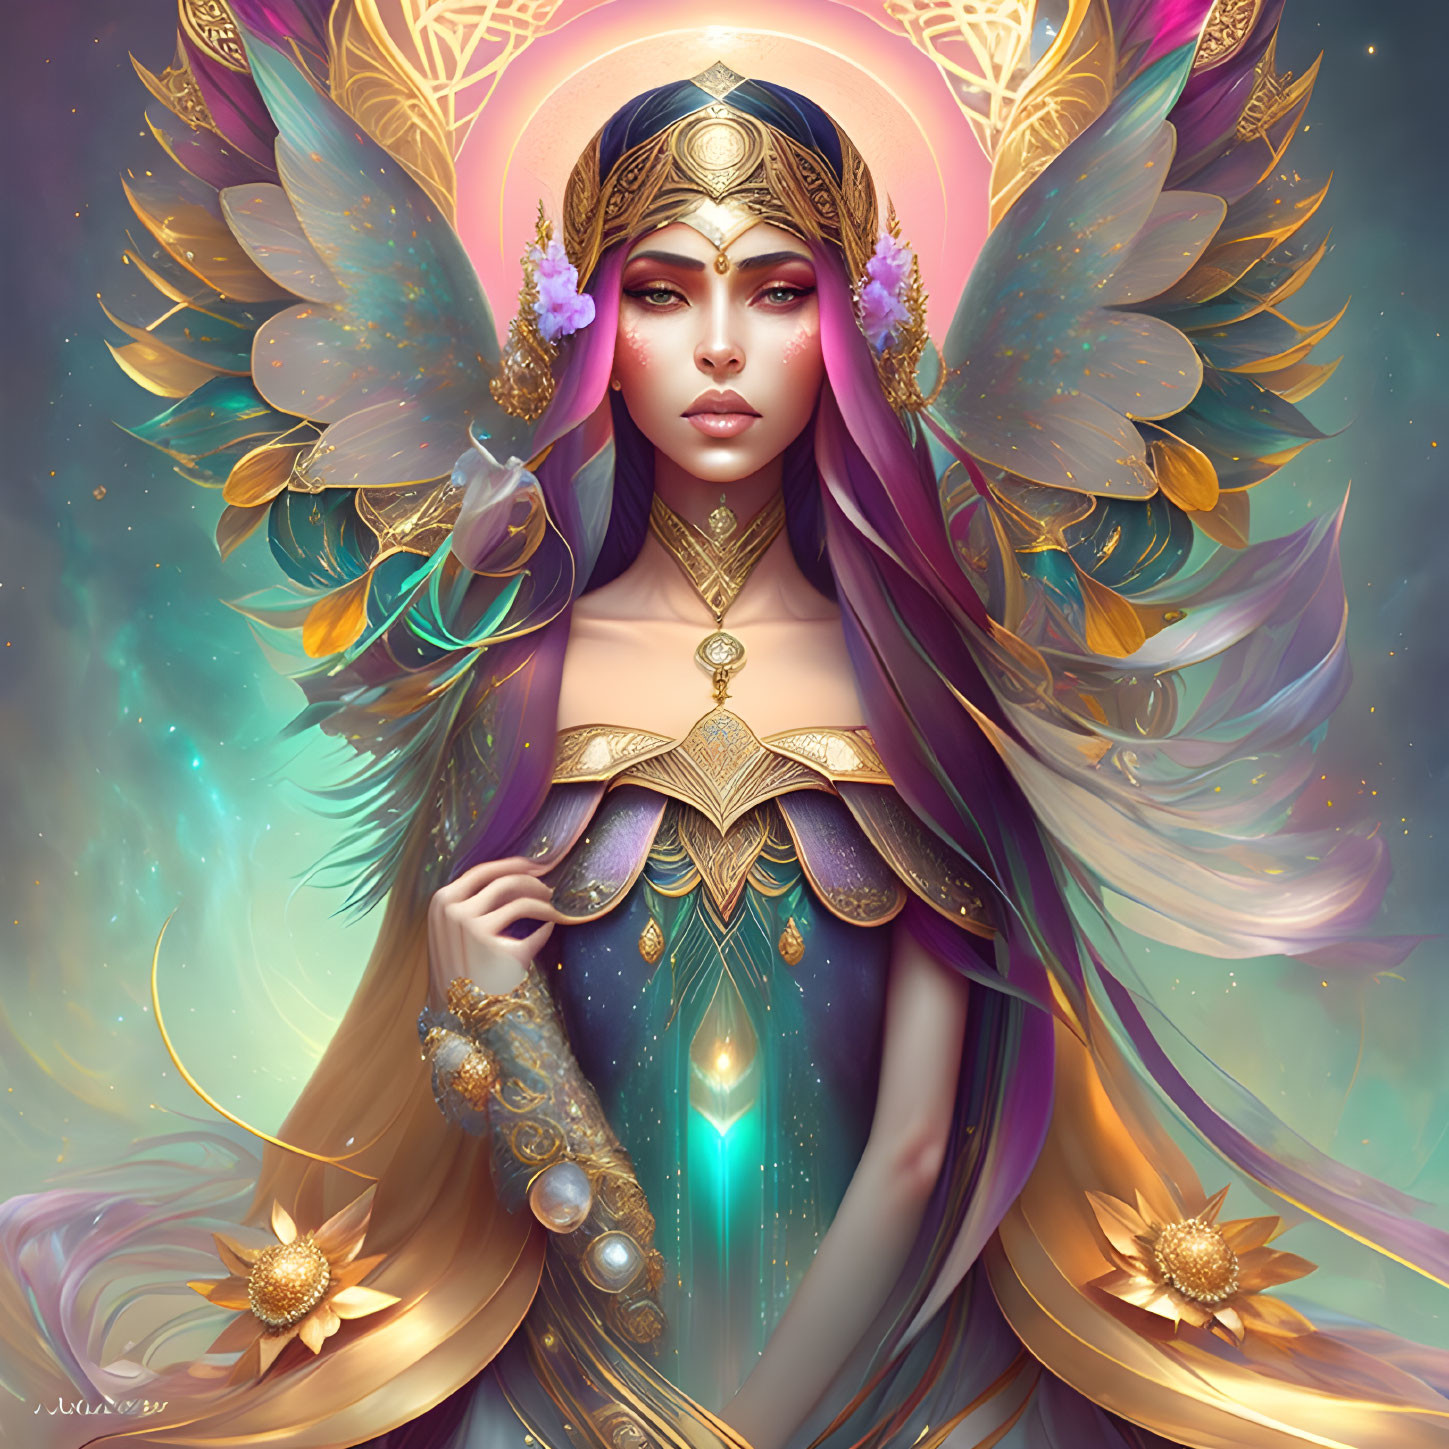 Fantasy-themed illustration of woman with purple hair and iridescent wings